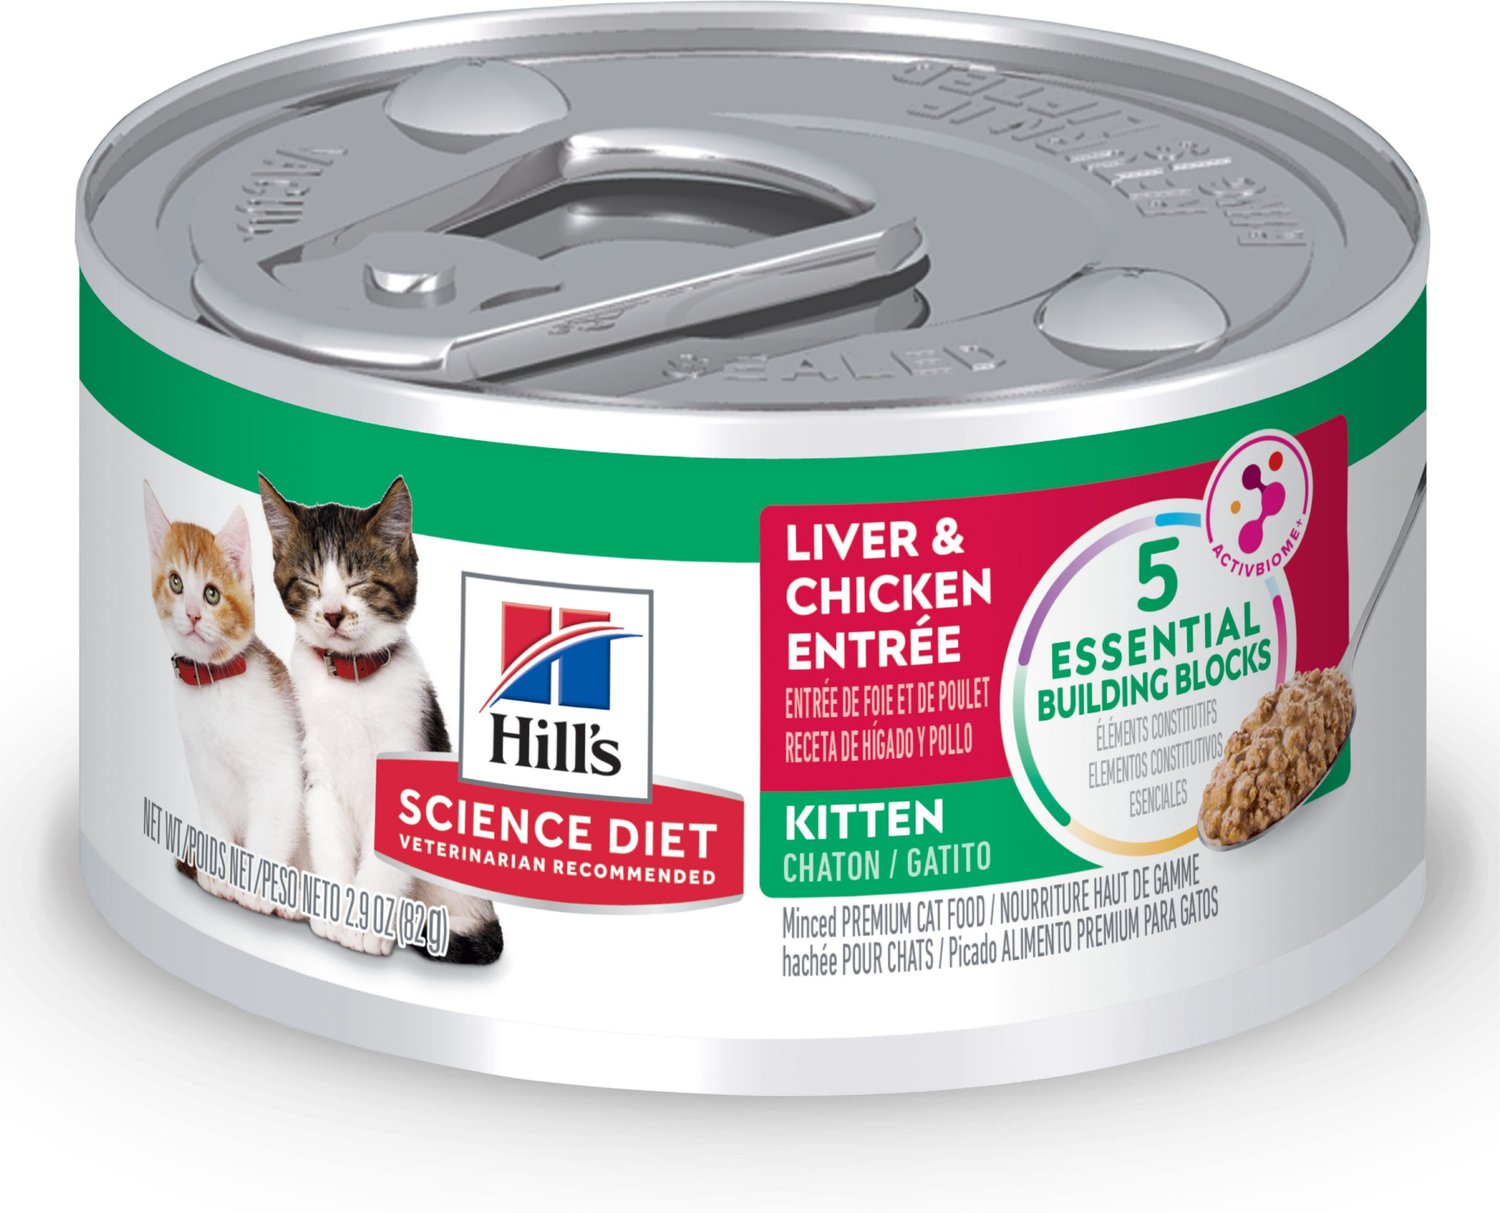 Hill's Science Diet Kitten Liver & Chicken Entree Canned Cat Food, 2.9